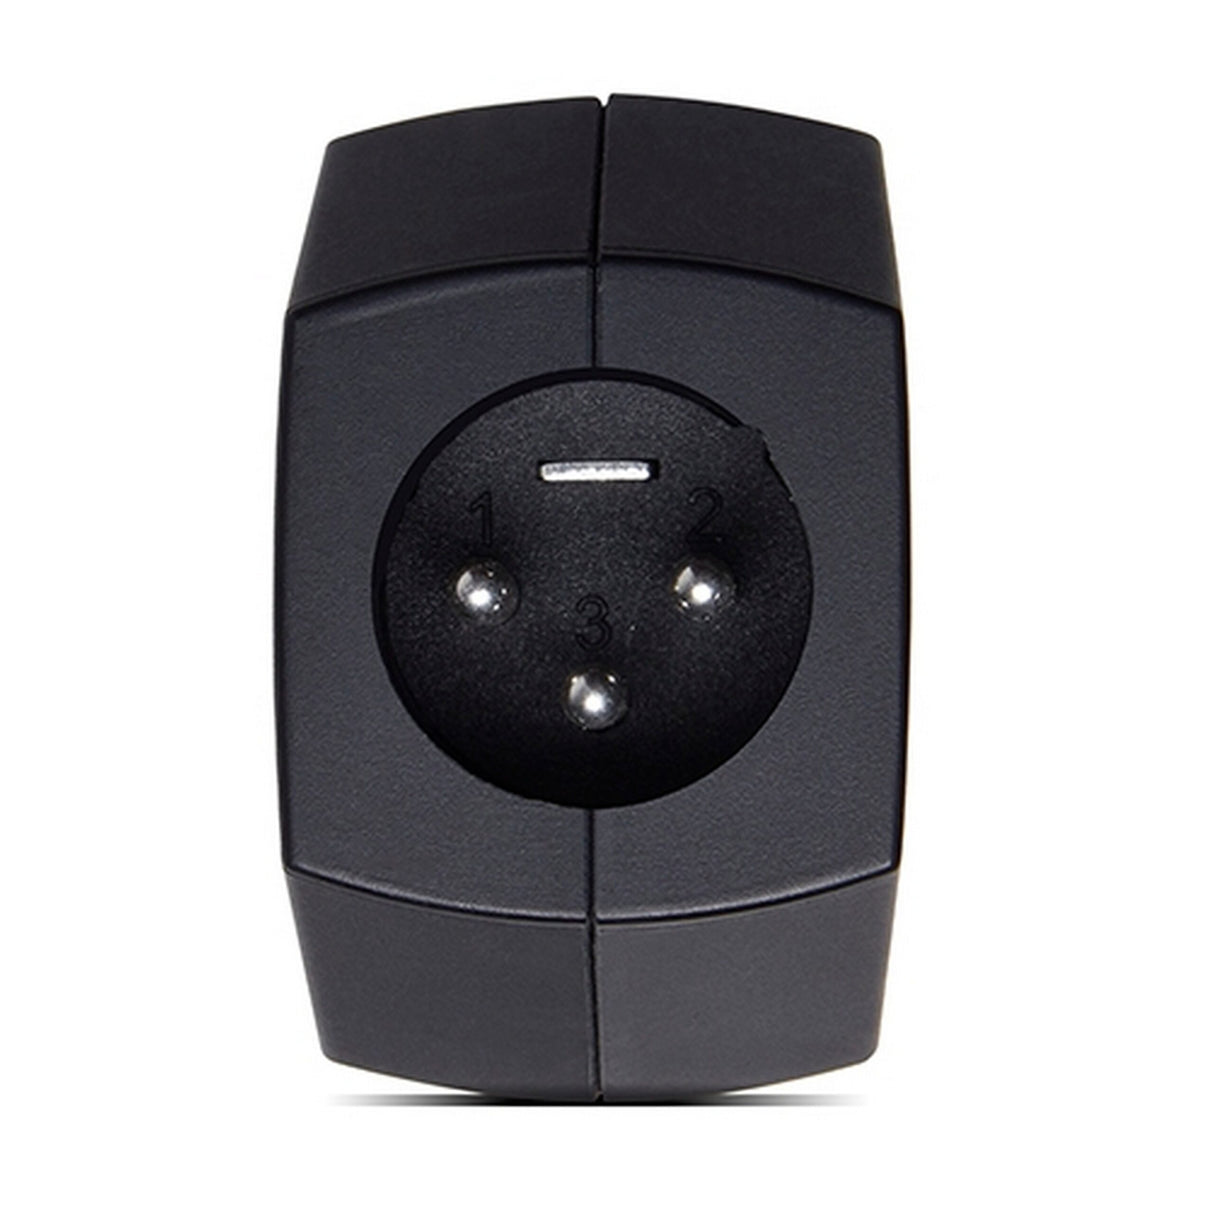 Alto Professional Bluetooth Ultimate Stereo Bluetooth Adapter